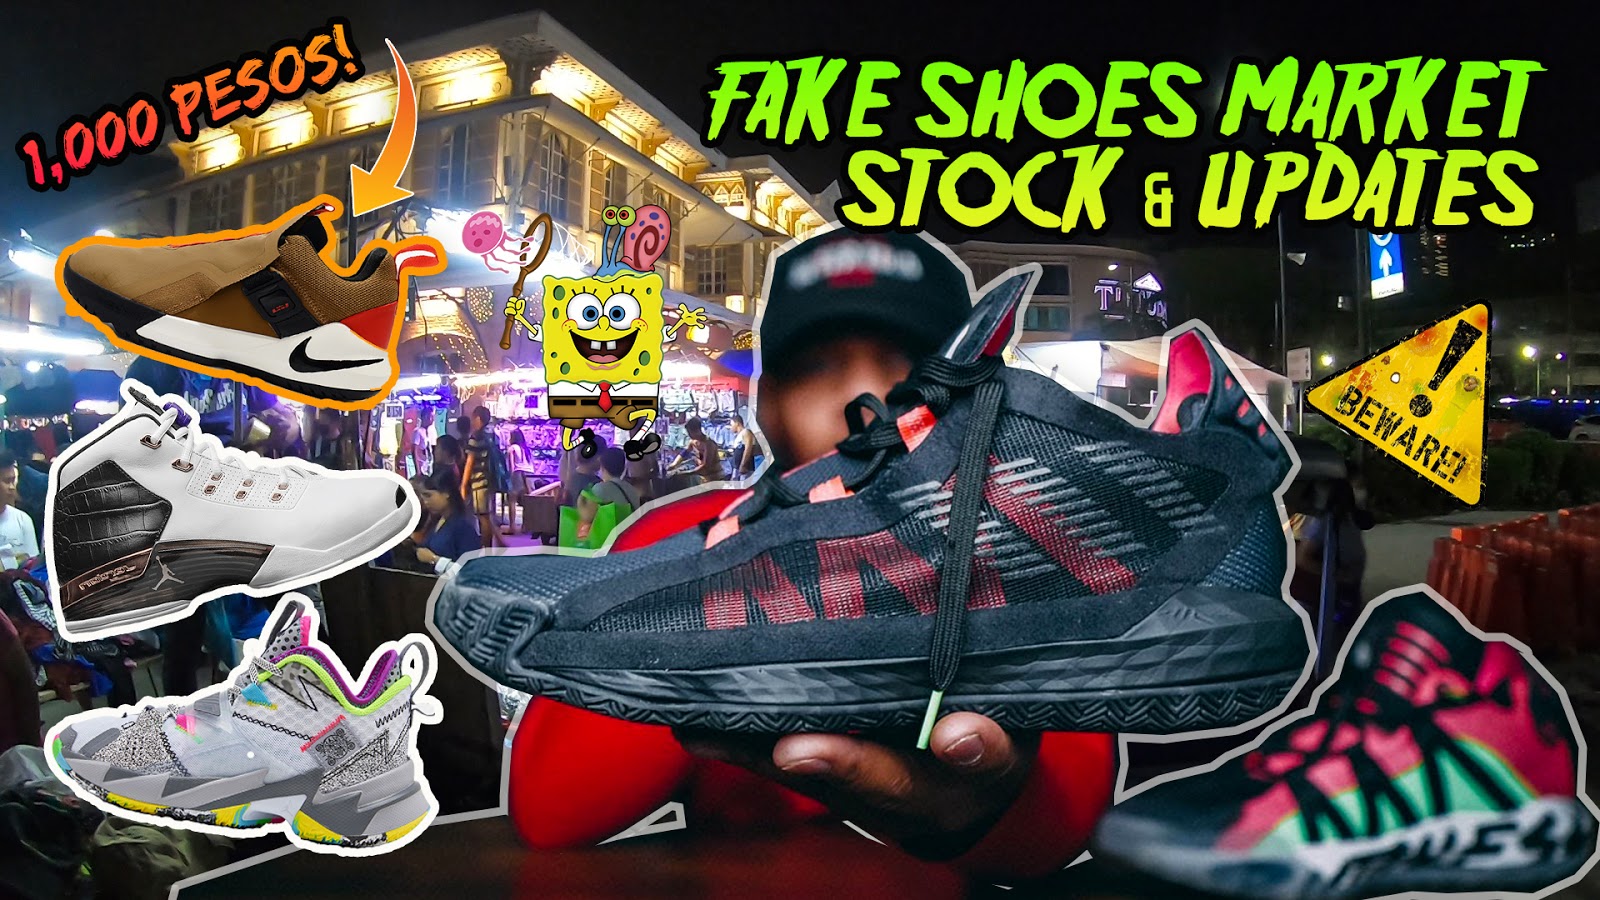 Solid but BUY ORIGINAL Shoes! Fake Shoes Market Stock & Updates ...